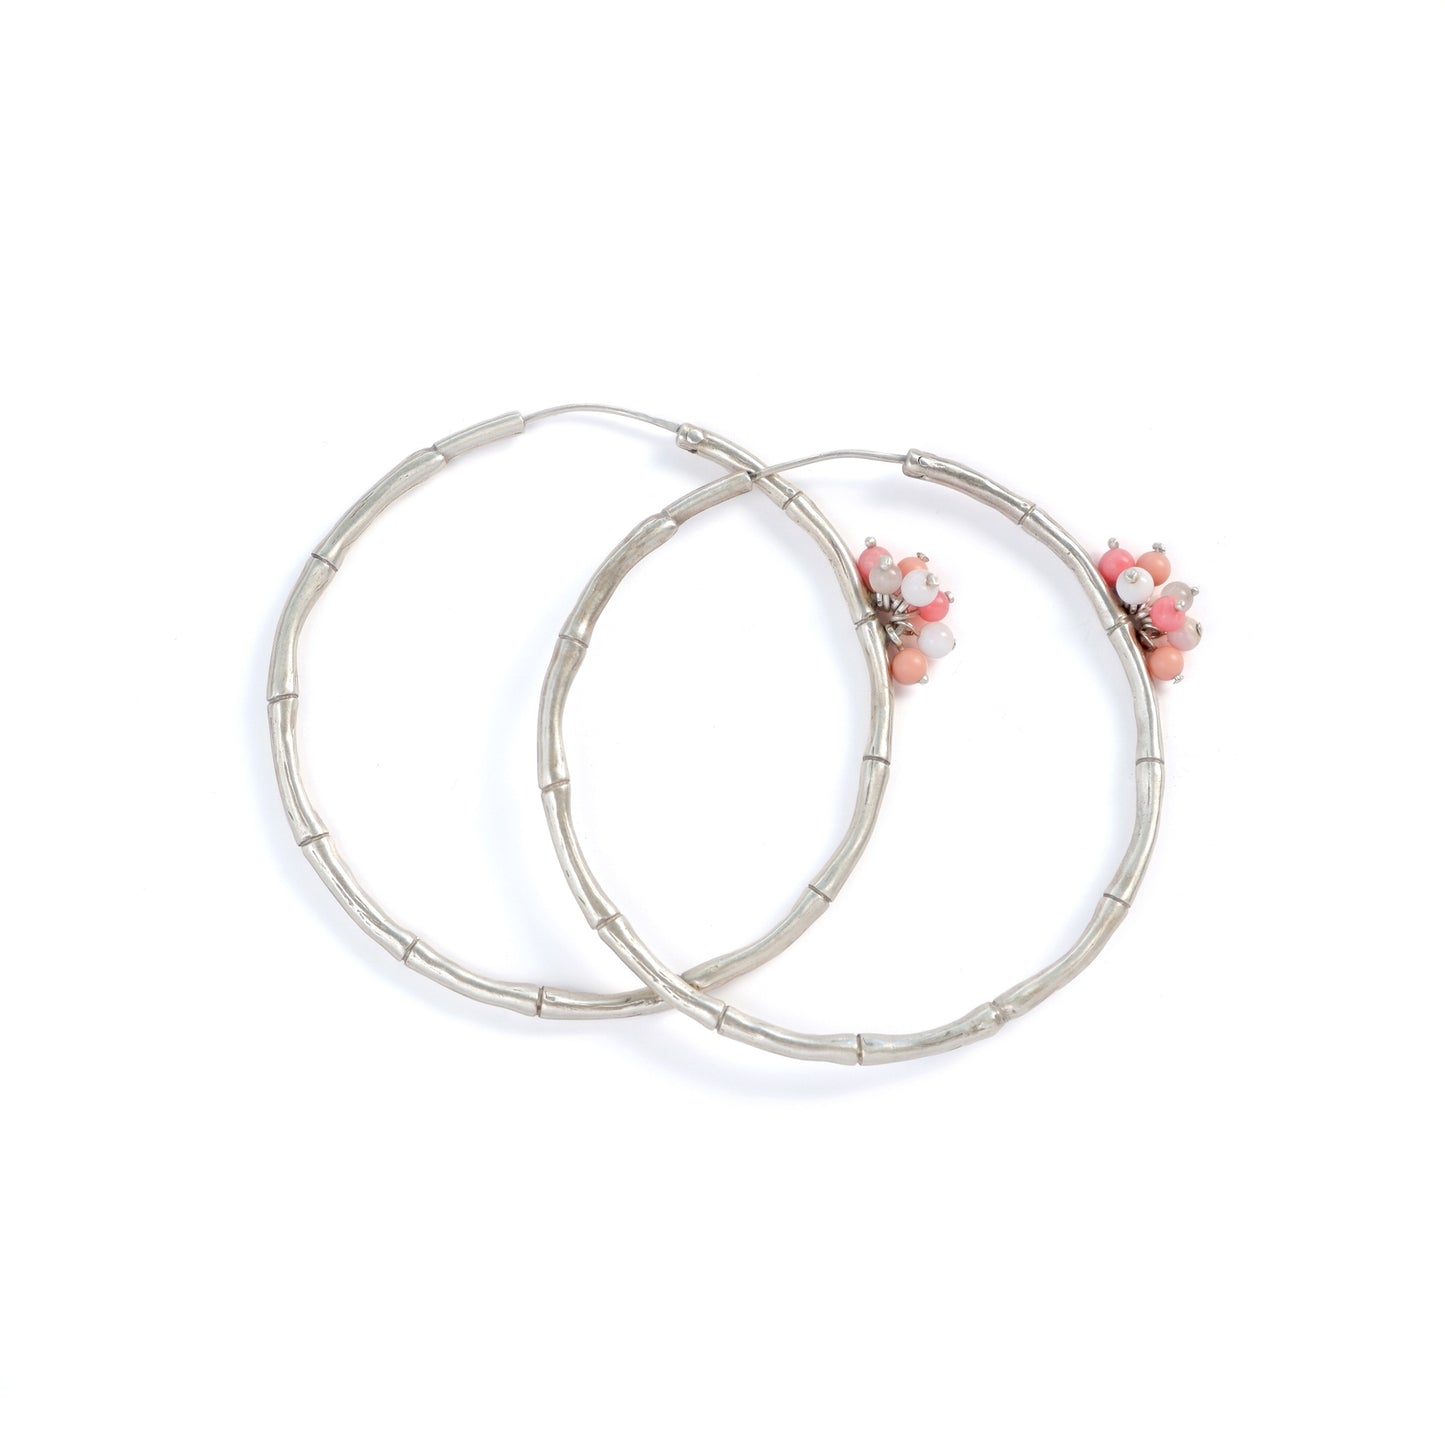 Sterling Silver Bamboo Hoops large size, pink gemstone Bauble beads